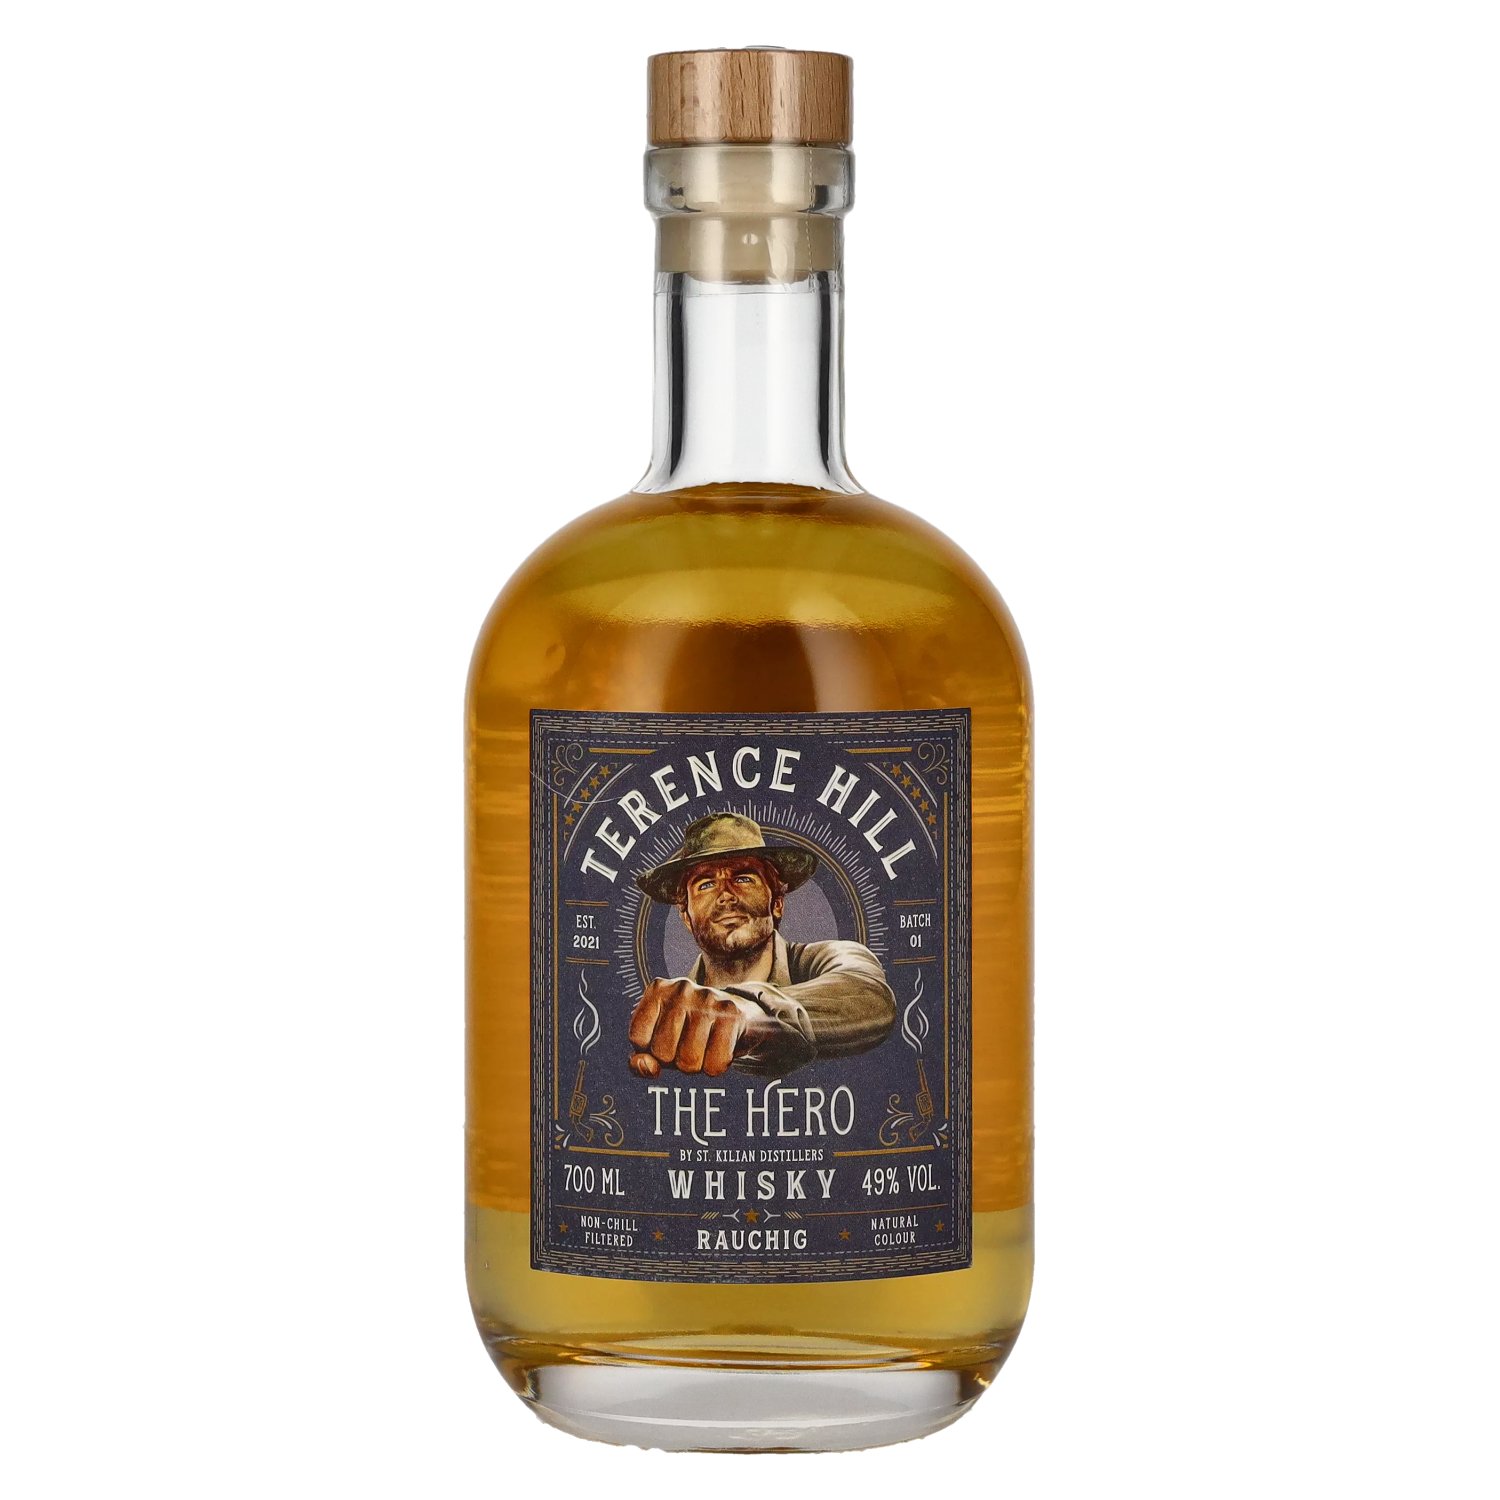 HERO 49% Hill 0,7l Terence THE Vol. Whisky Rauchig